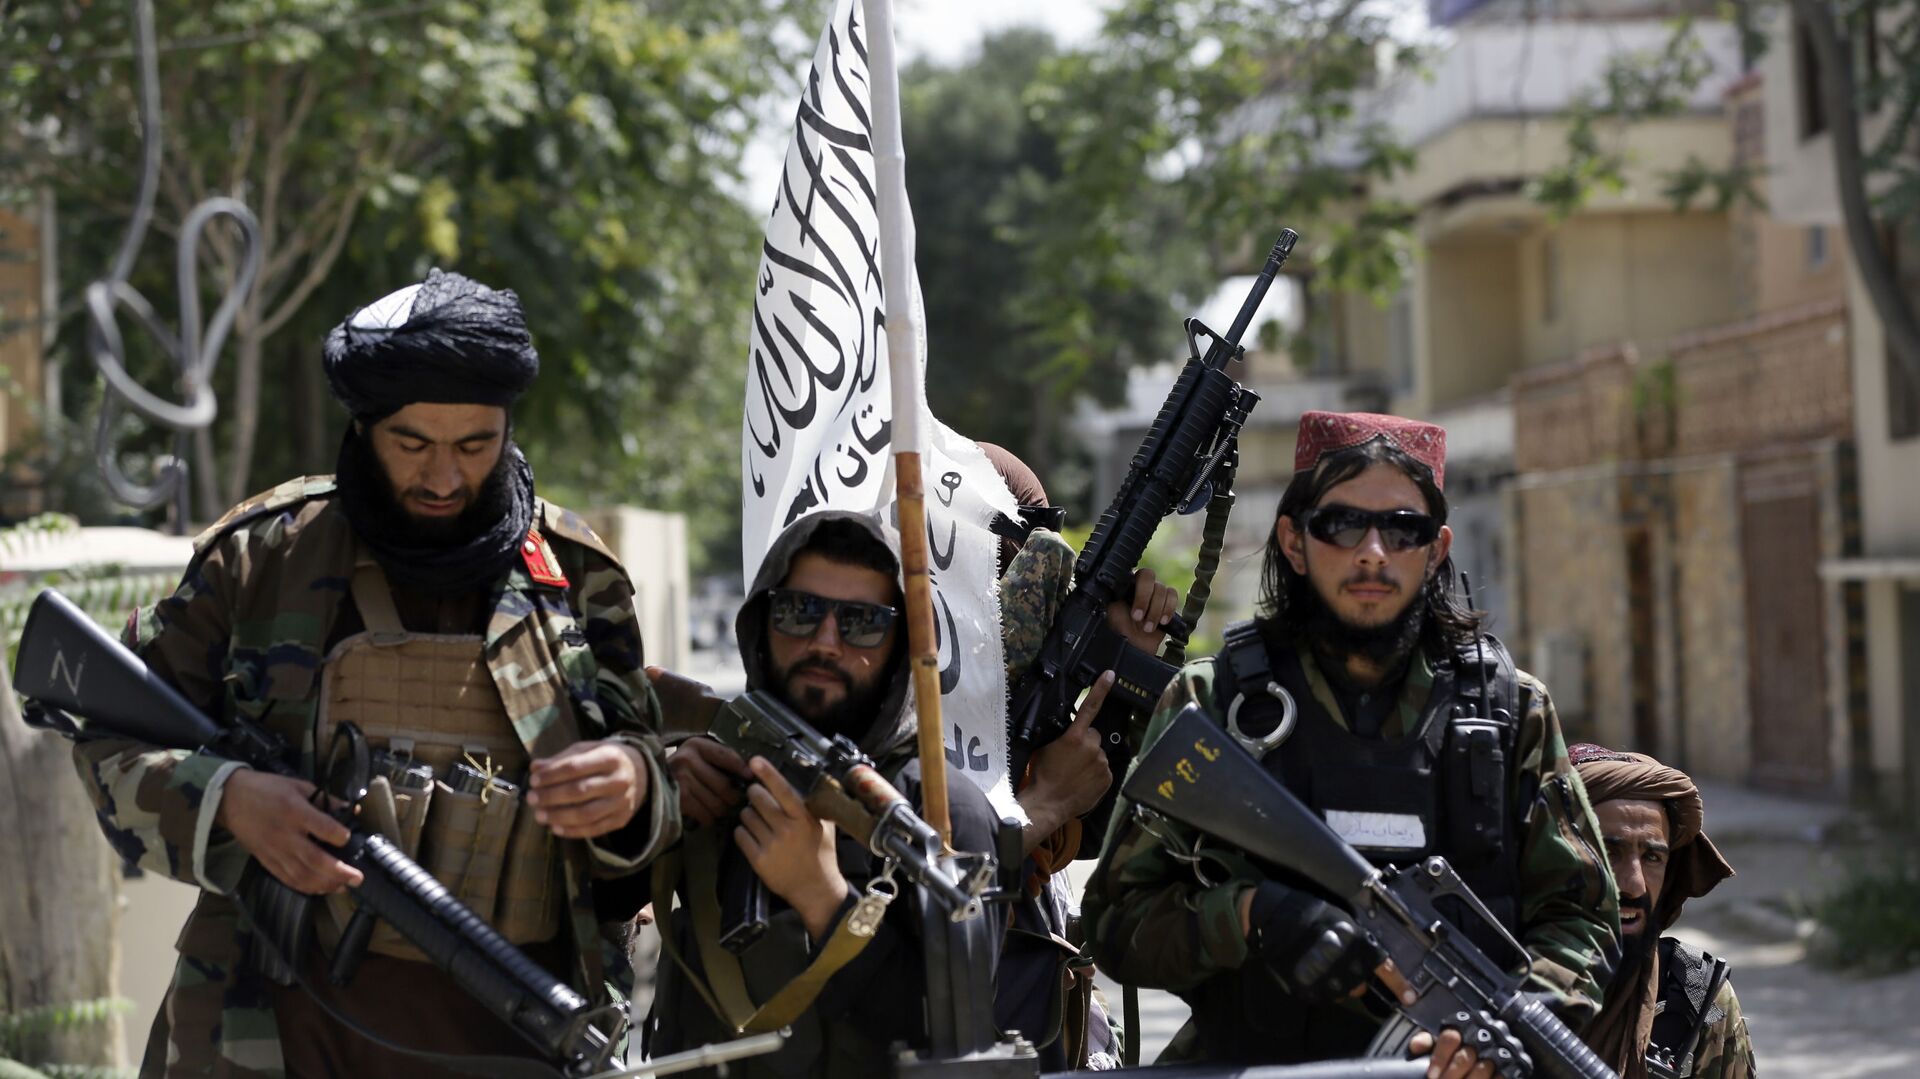 In this Aug. 19, 2021 file photo, Taliban fighters display their flag on patrol in Kabul, Afghanistan. When U.S. President Joe Biden took office early this year, Western allies were falling over themselves to welcome and praise him and hail a new era in trans-Atlantic cooperation. - Sputnik International, 1920, 27.08.2021